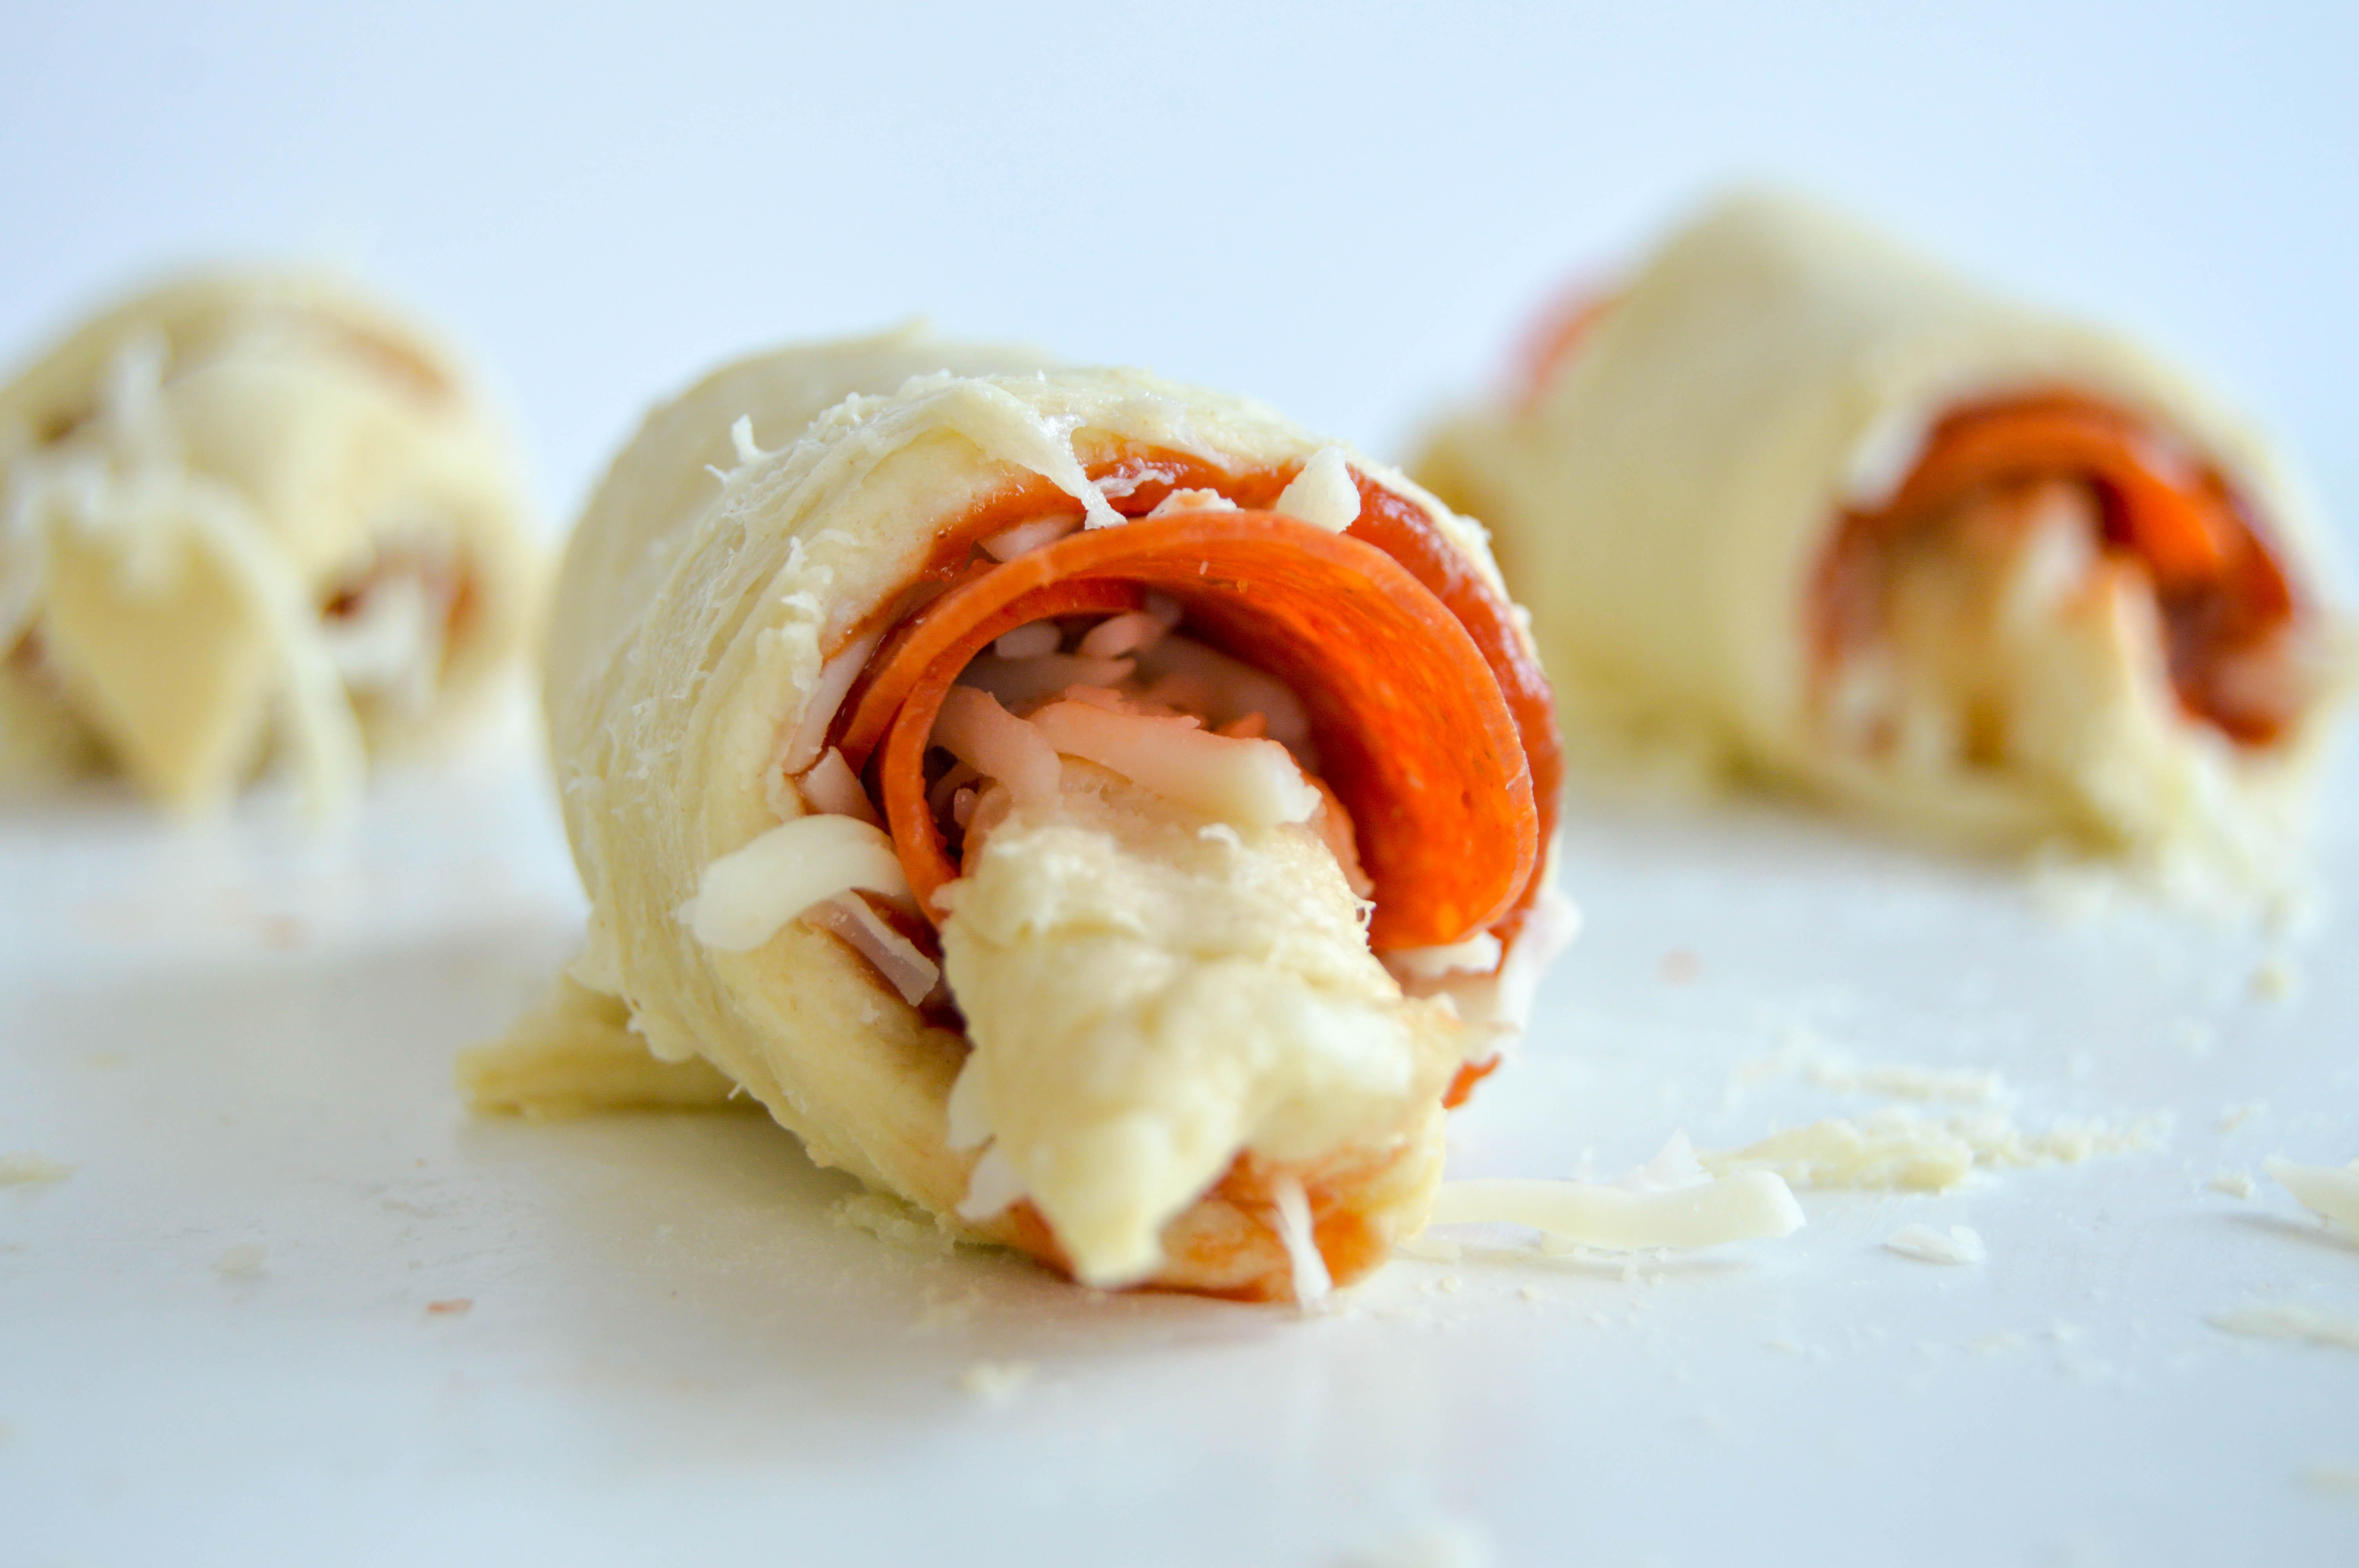 Pizza rolled